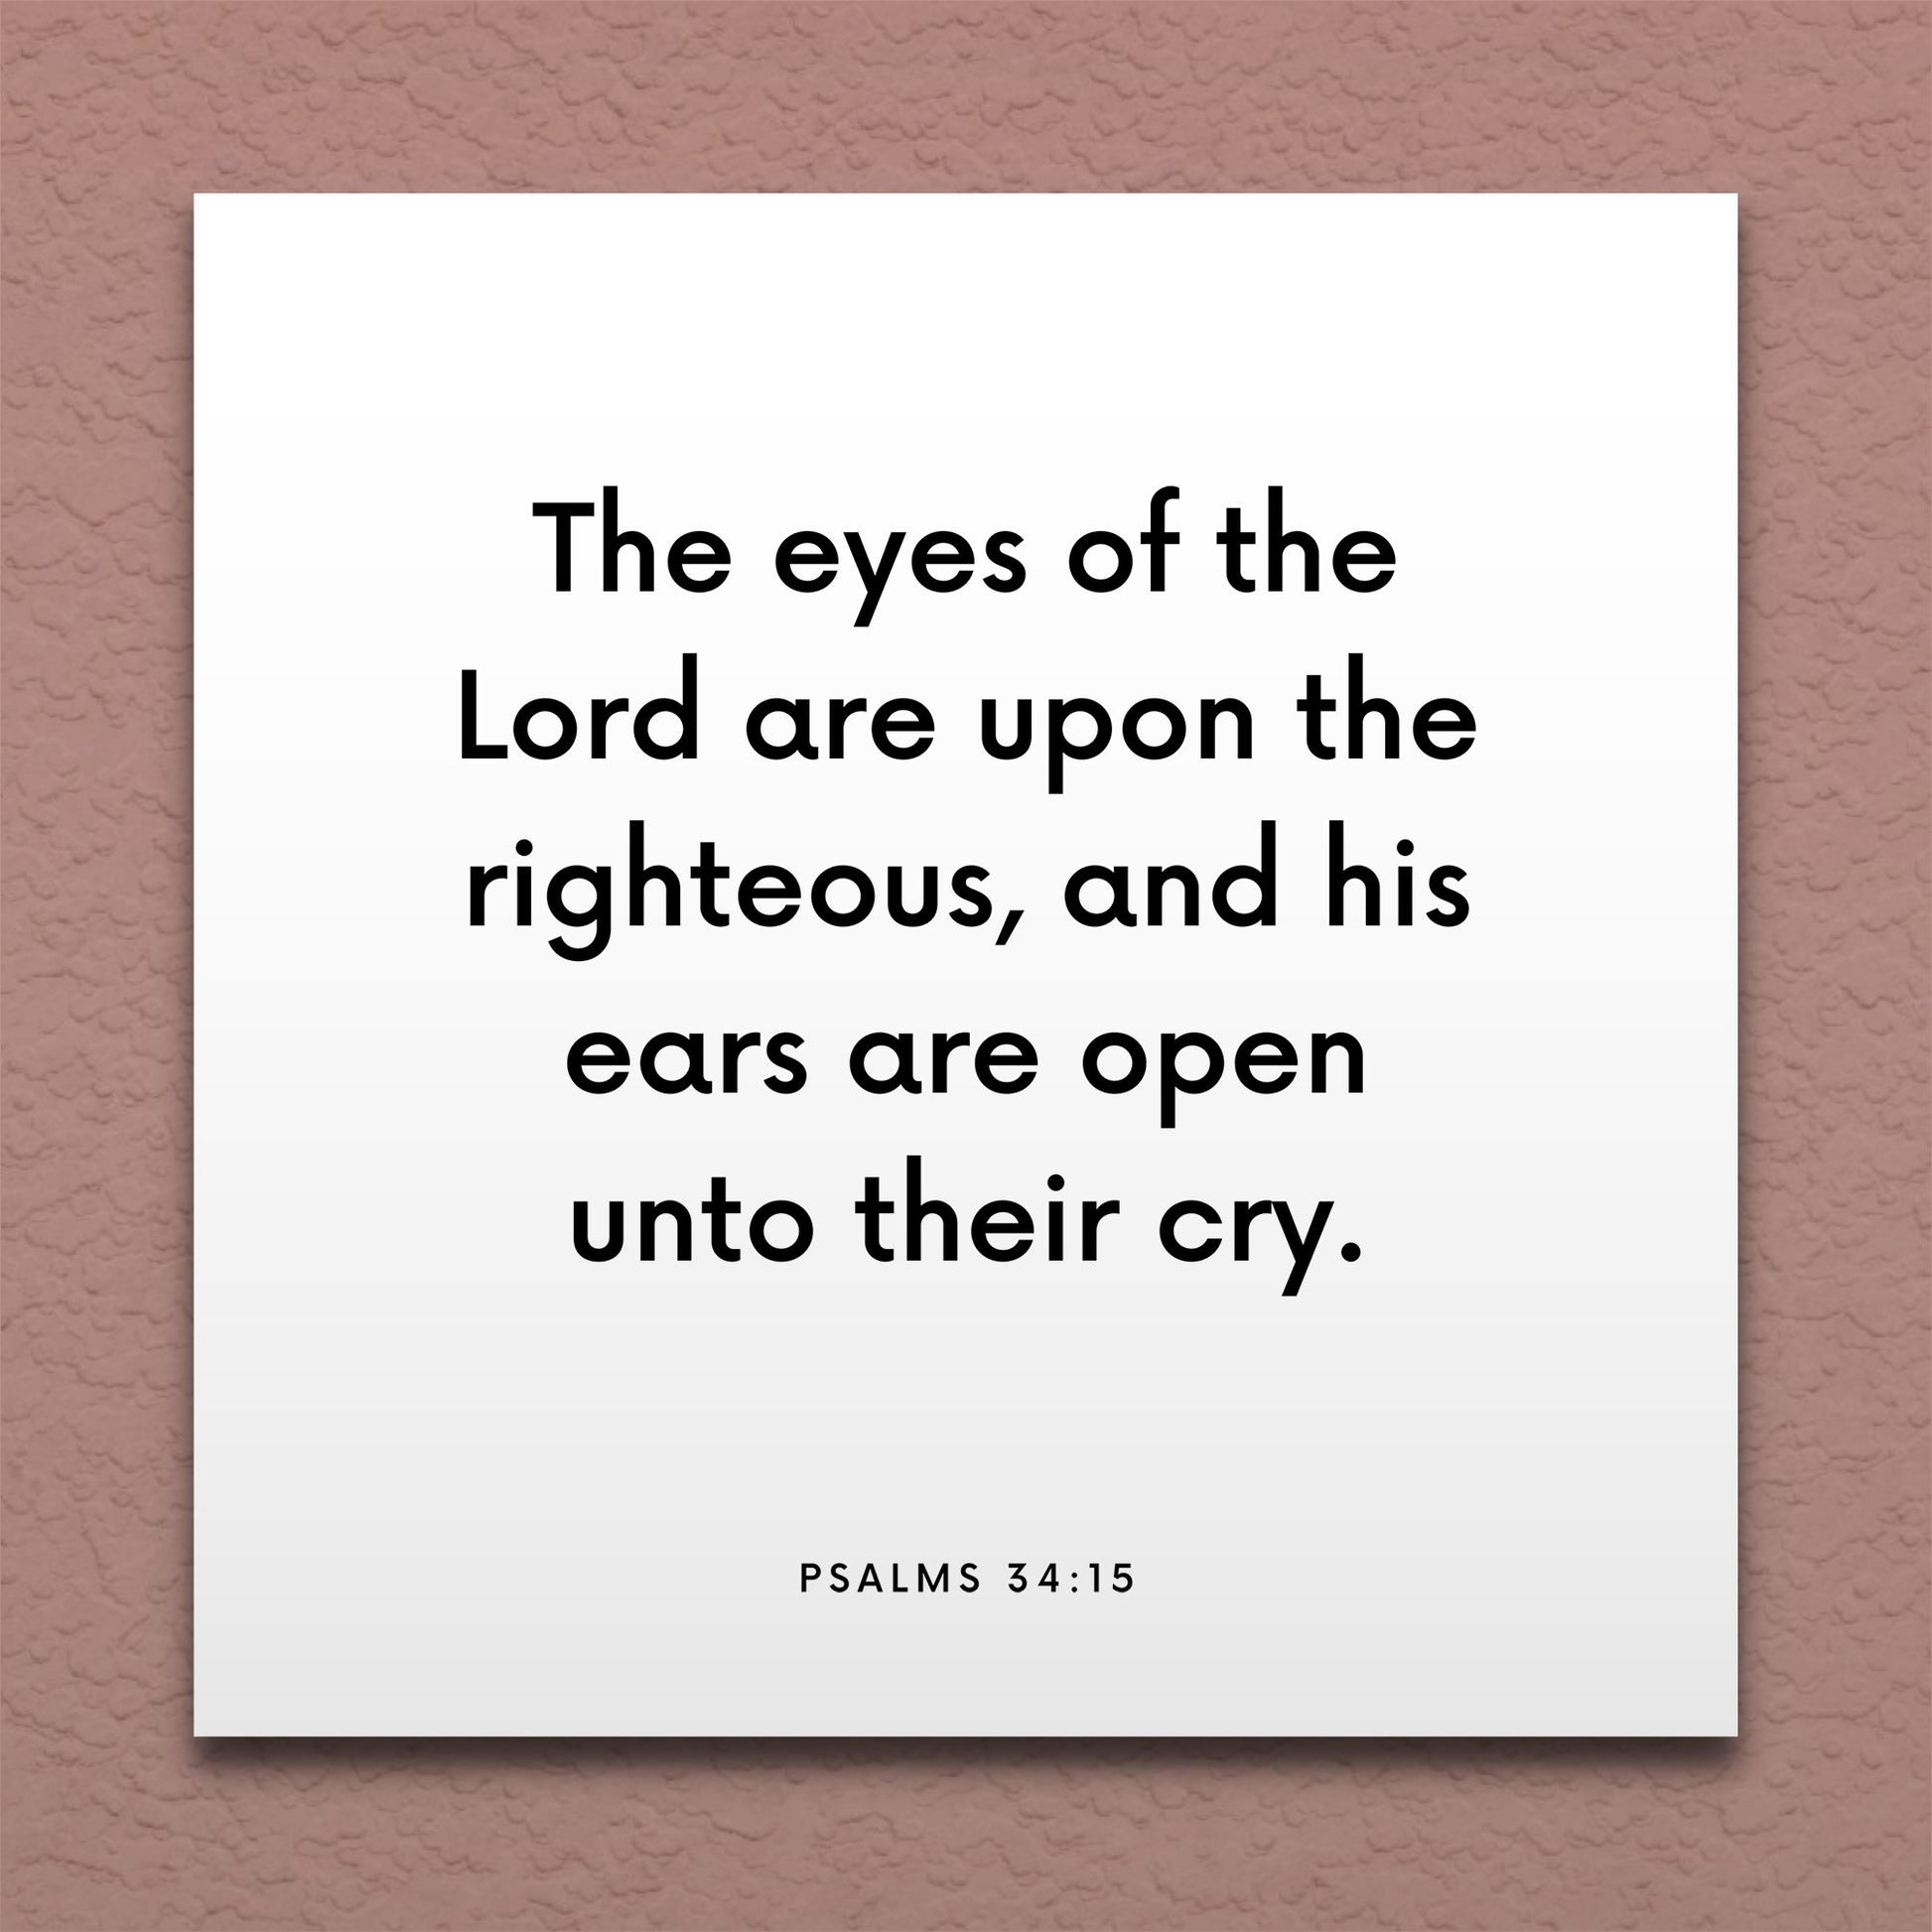 Wall-mounted scripture tile for Psalms 34:15 - "The eyes of the Lord are upon the righteous"